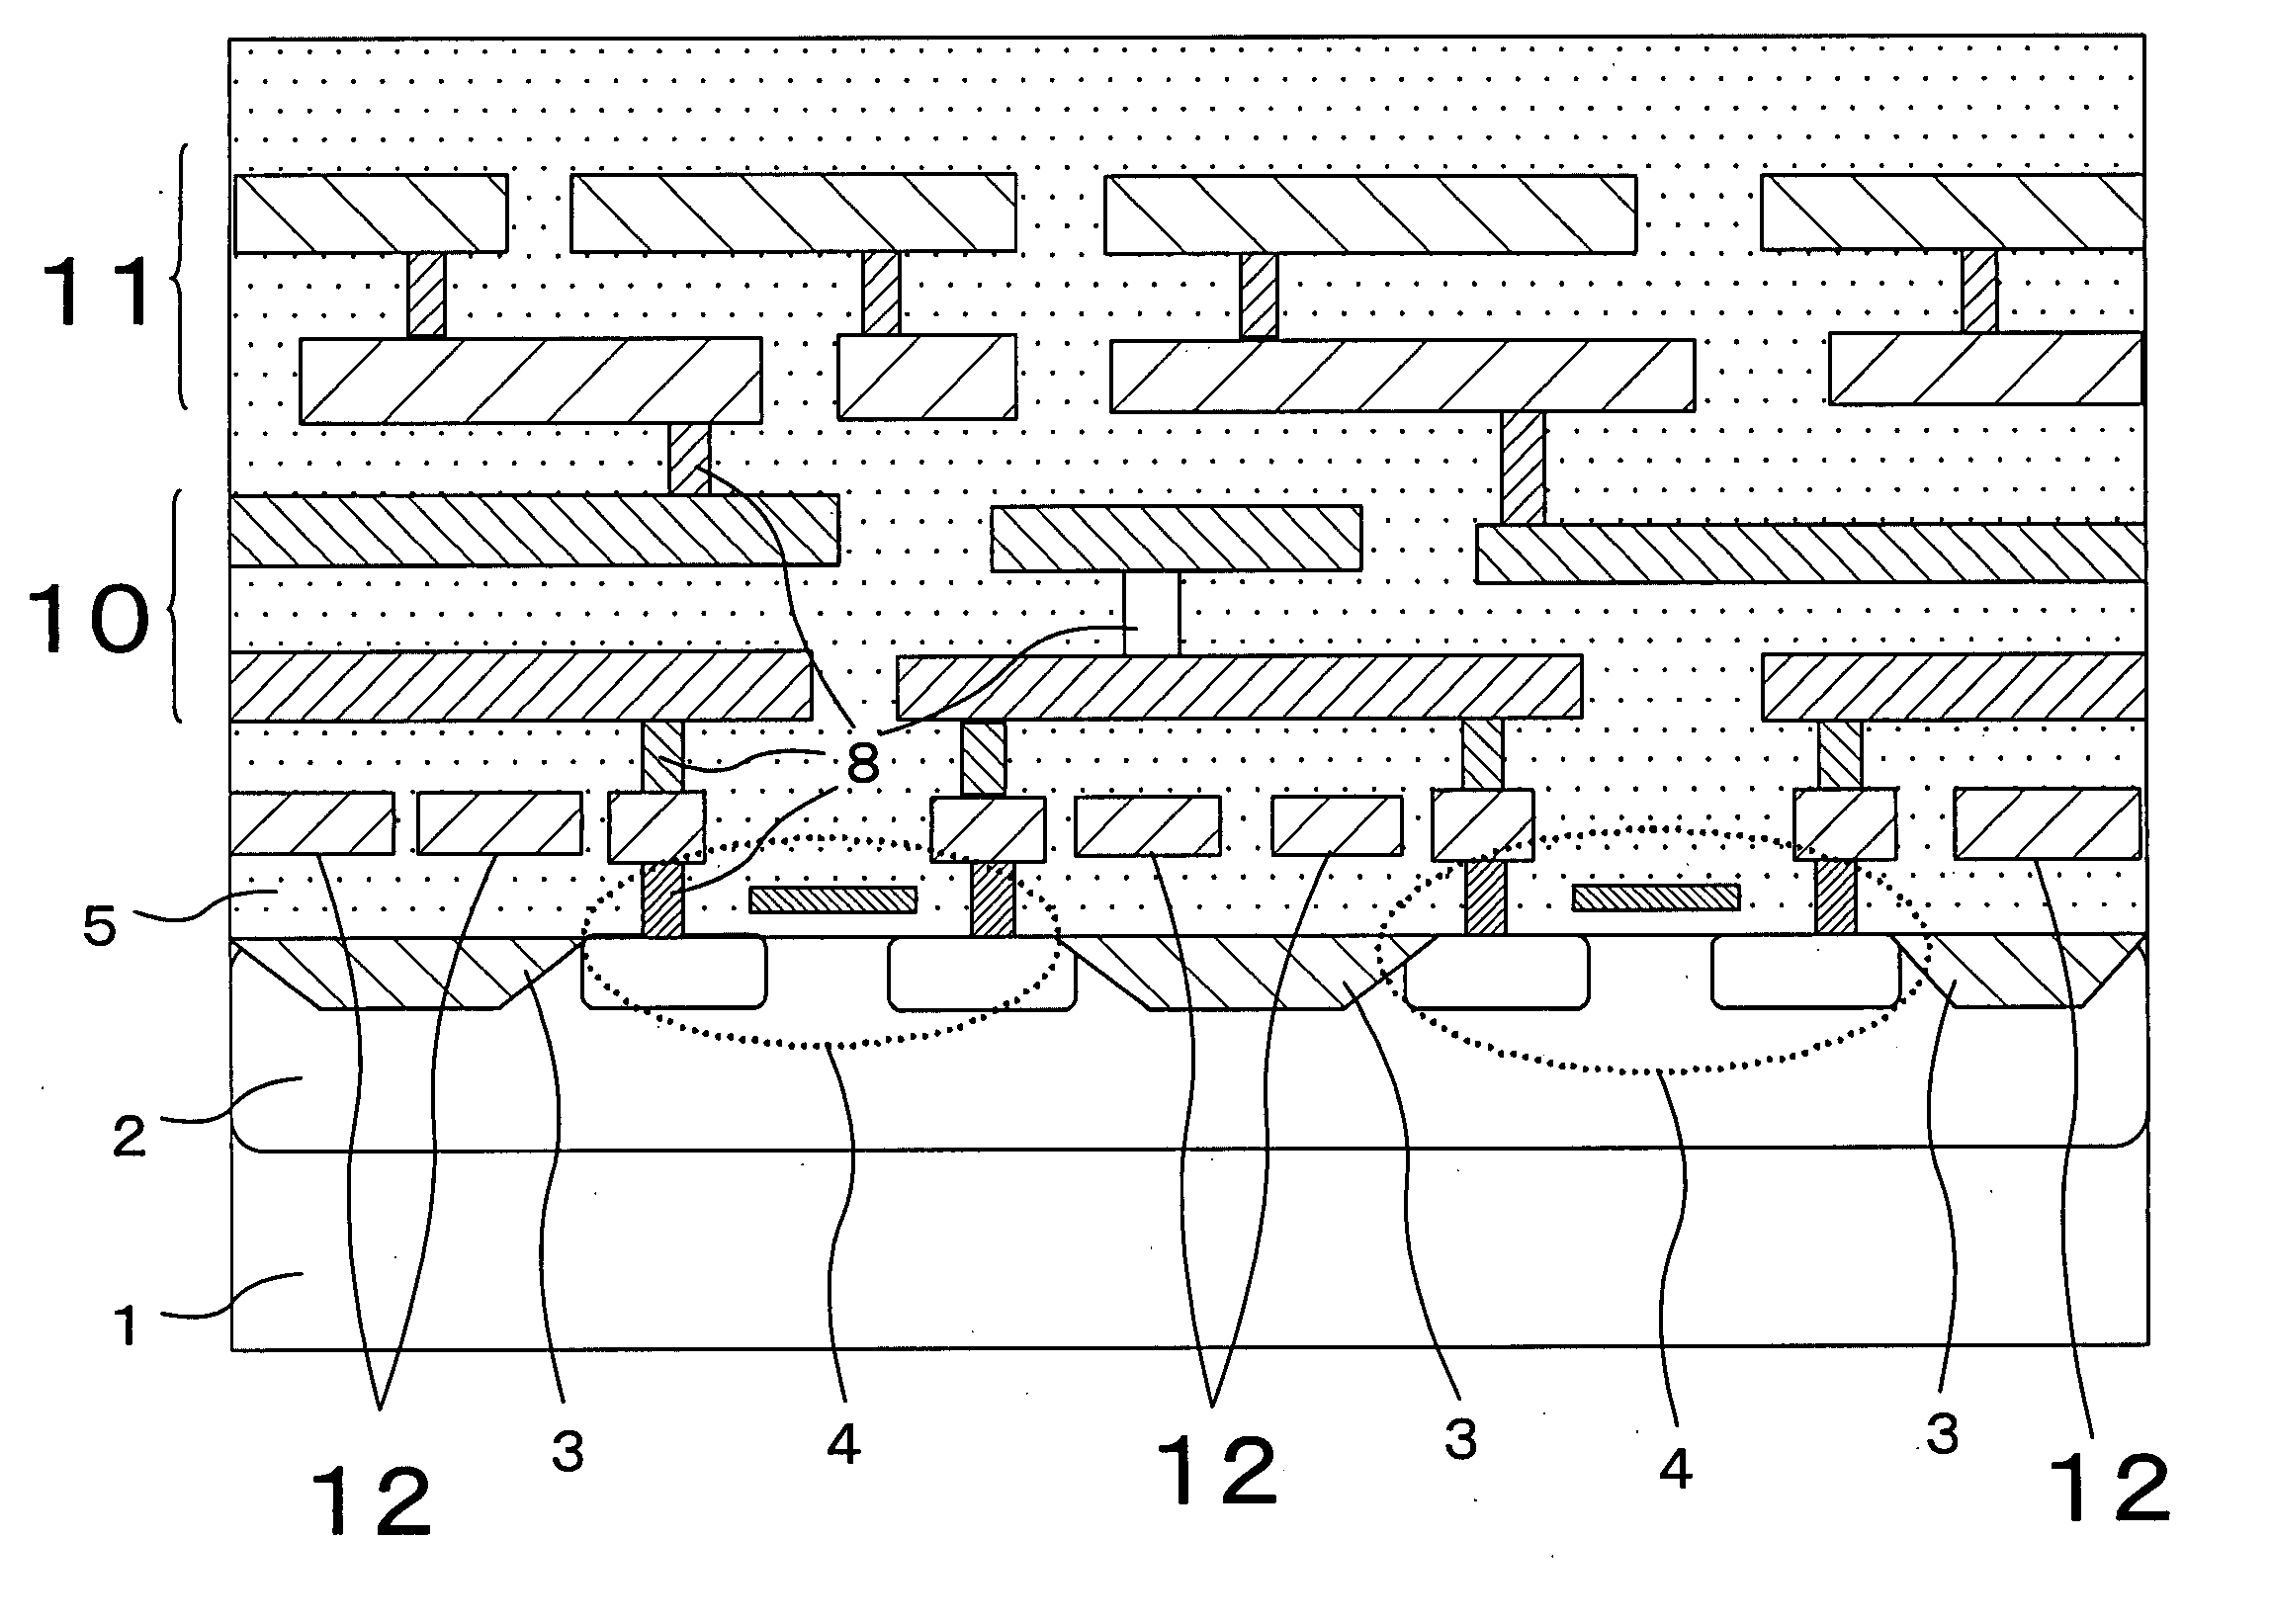 Tamper-resistant semiconductor device